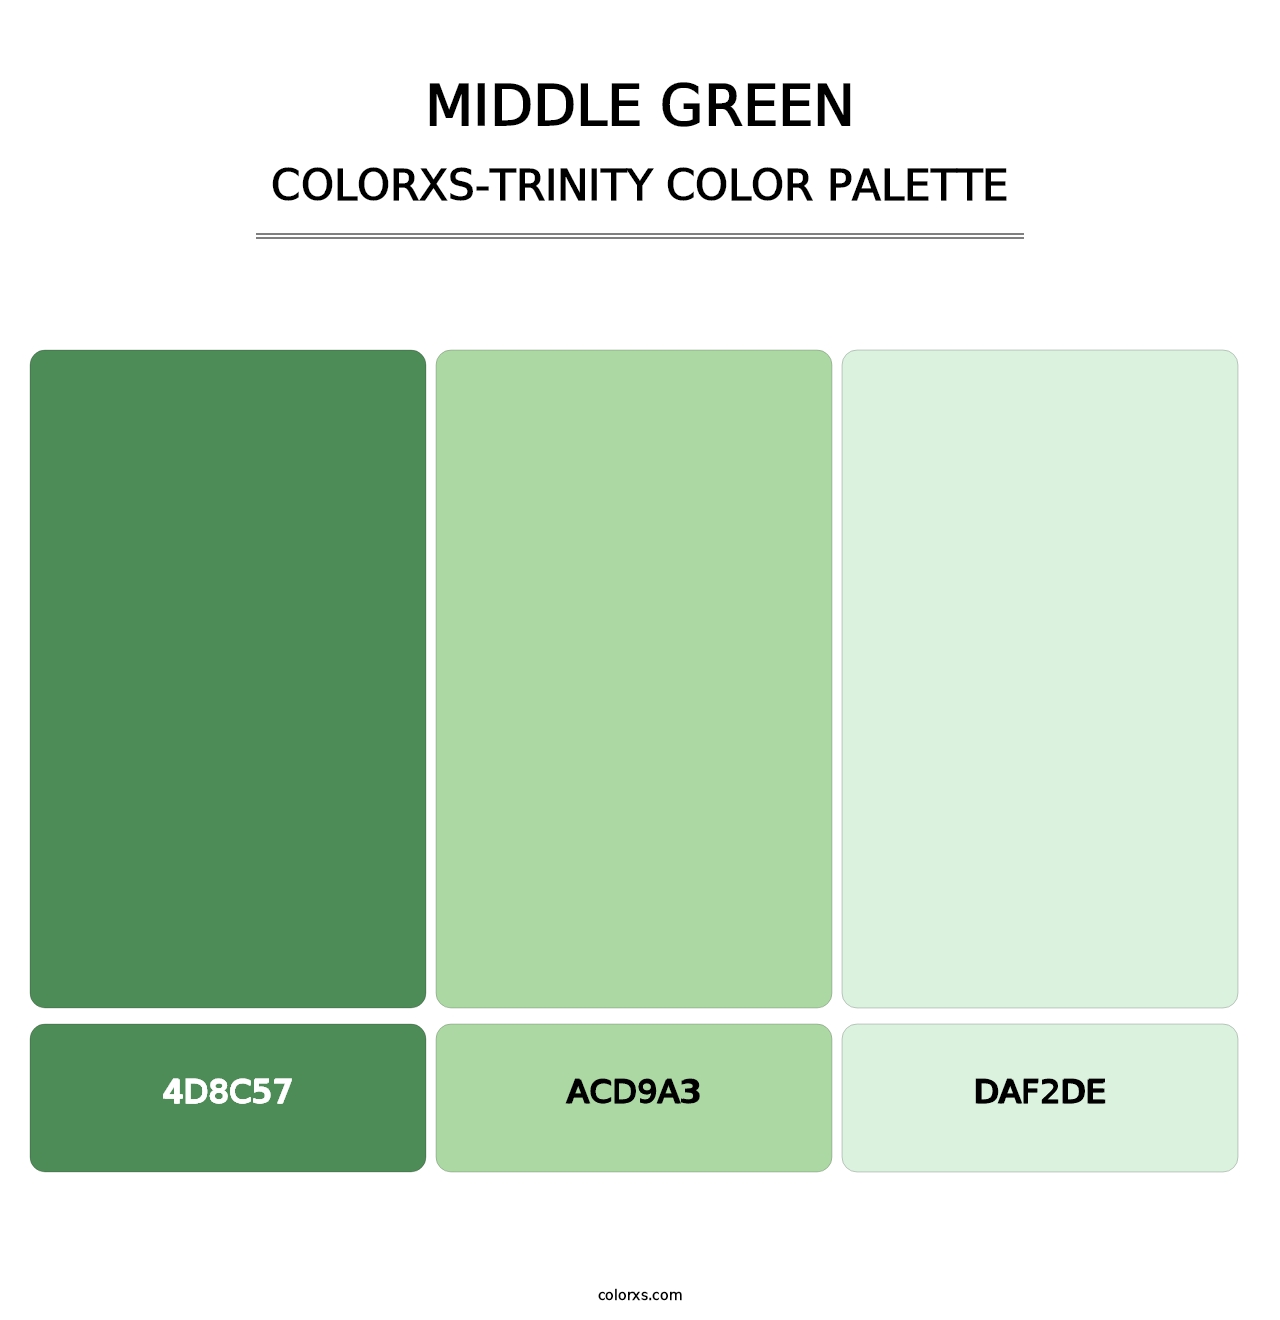 Middle Green - Colorxs Trinity Palette